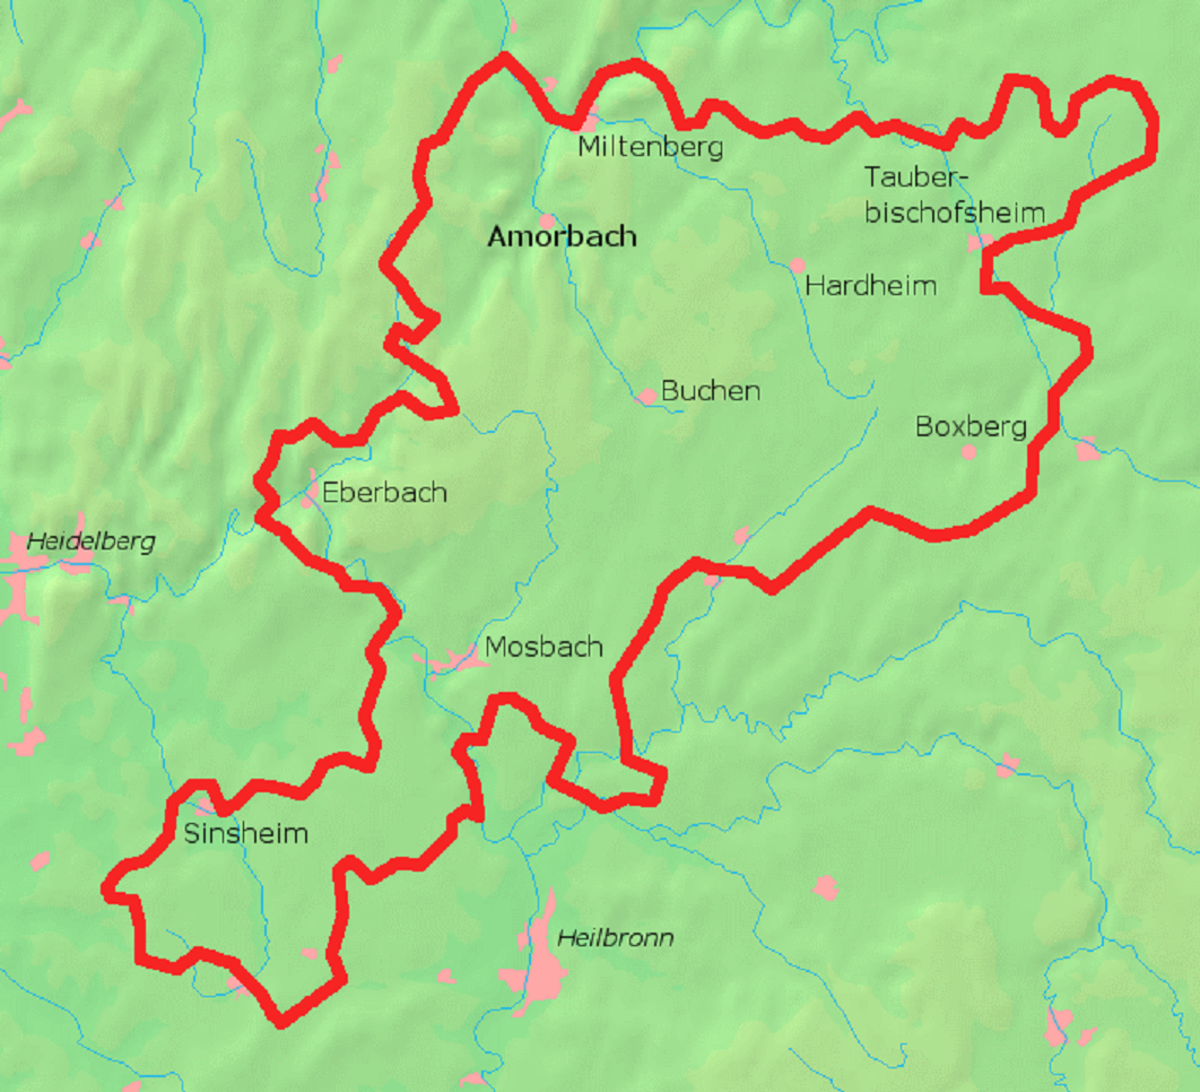 The short-lived Principality of Leiningen. In 1806 it was controlled by Bavaria, Hesse and Baden.